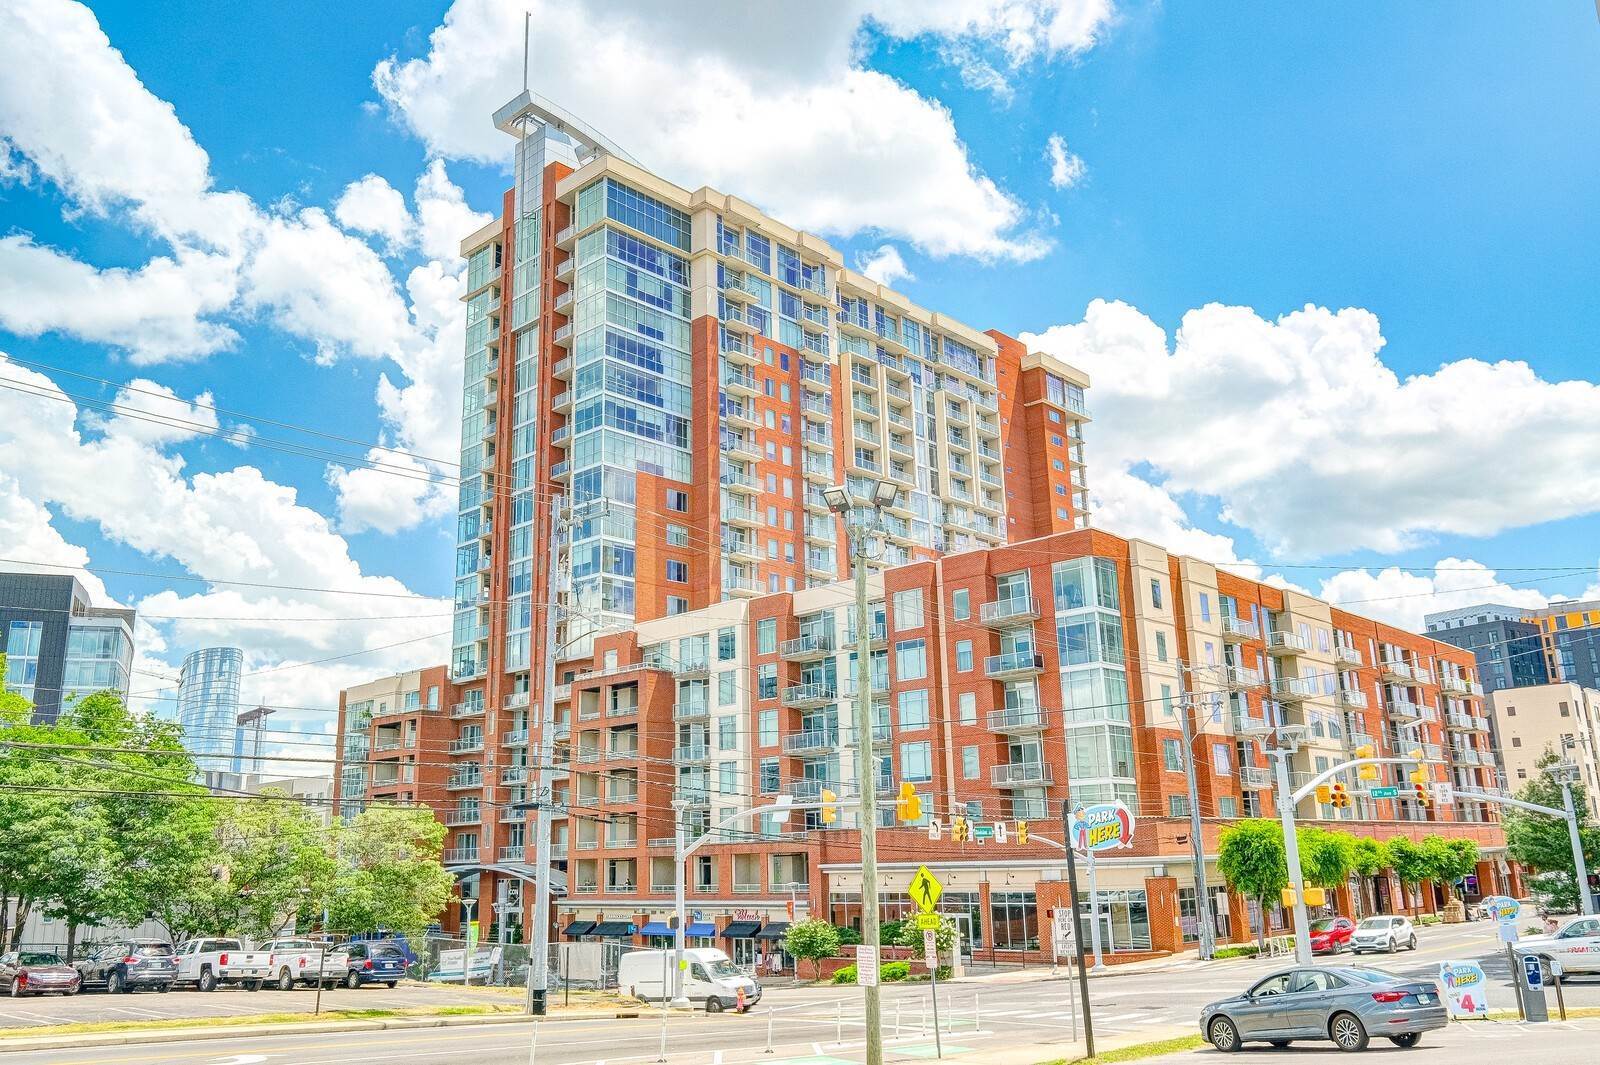 4. High Rise for Sale at 600 12th Ave, S Nashville, Tennessee 37203 United States